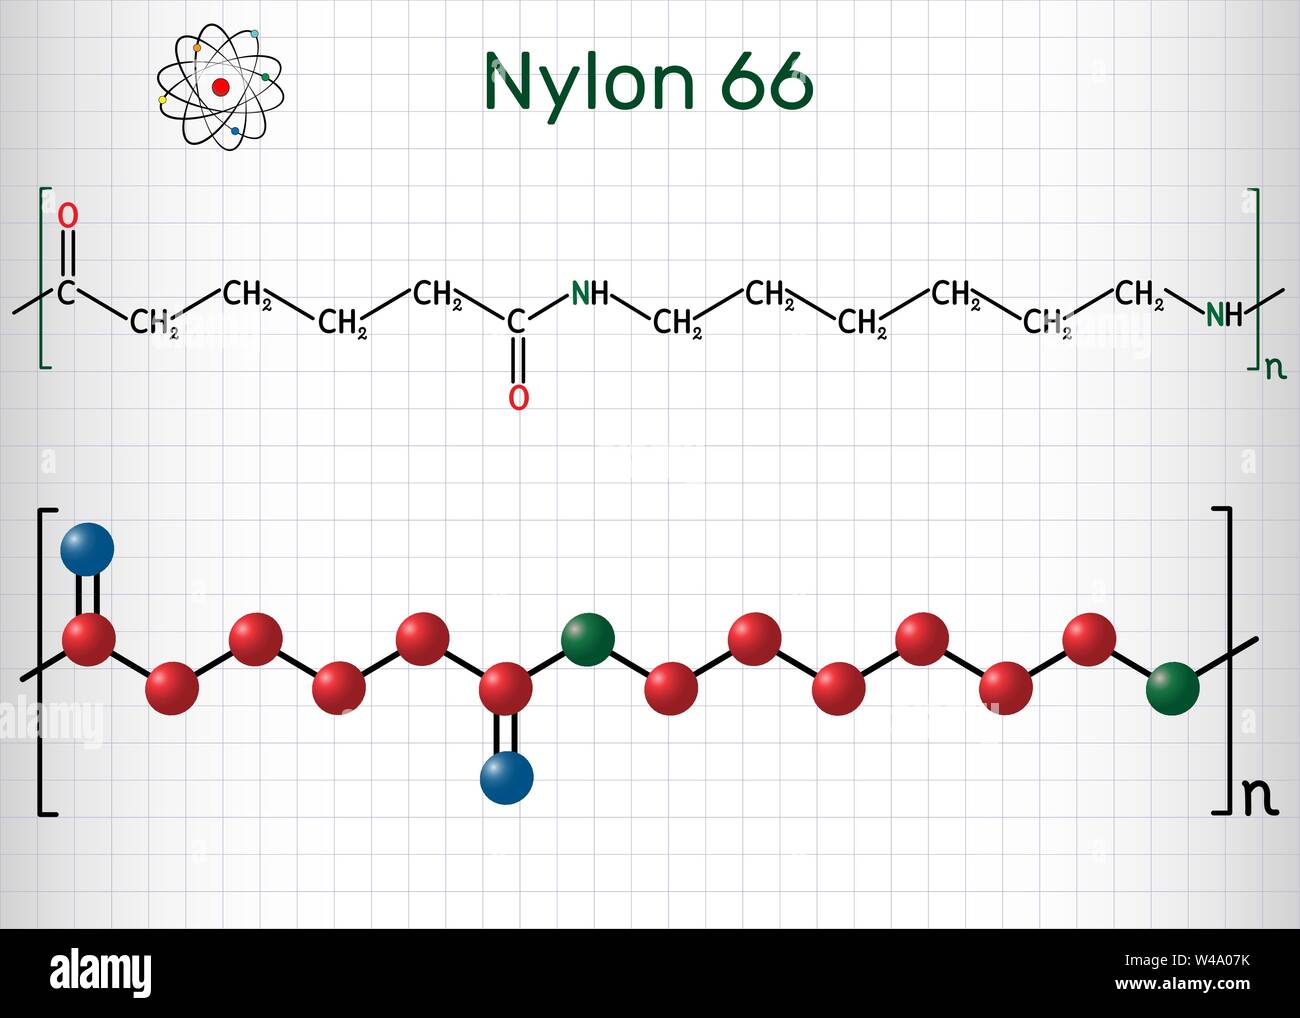 Nylon 66 or nylon molecule. It is plastic polymer. Structural